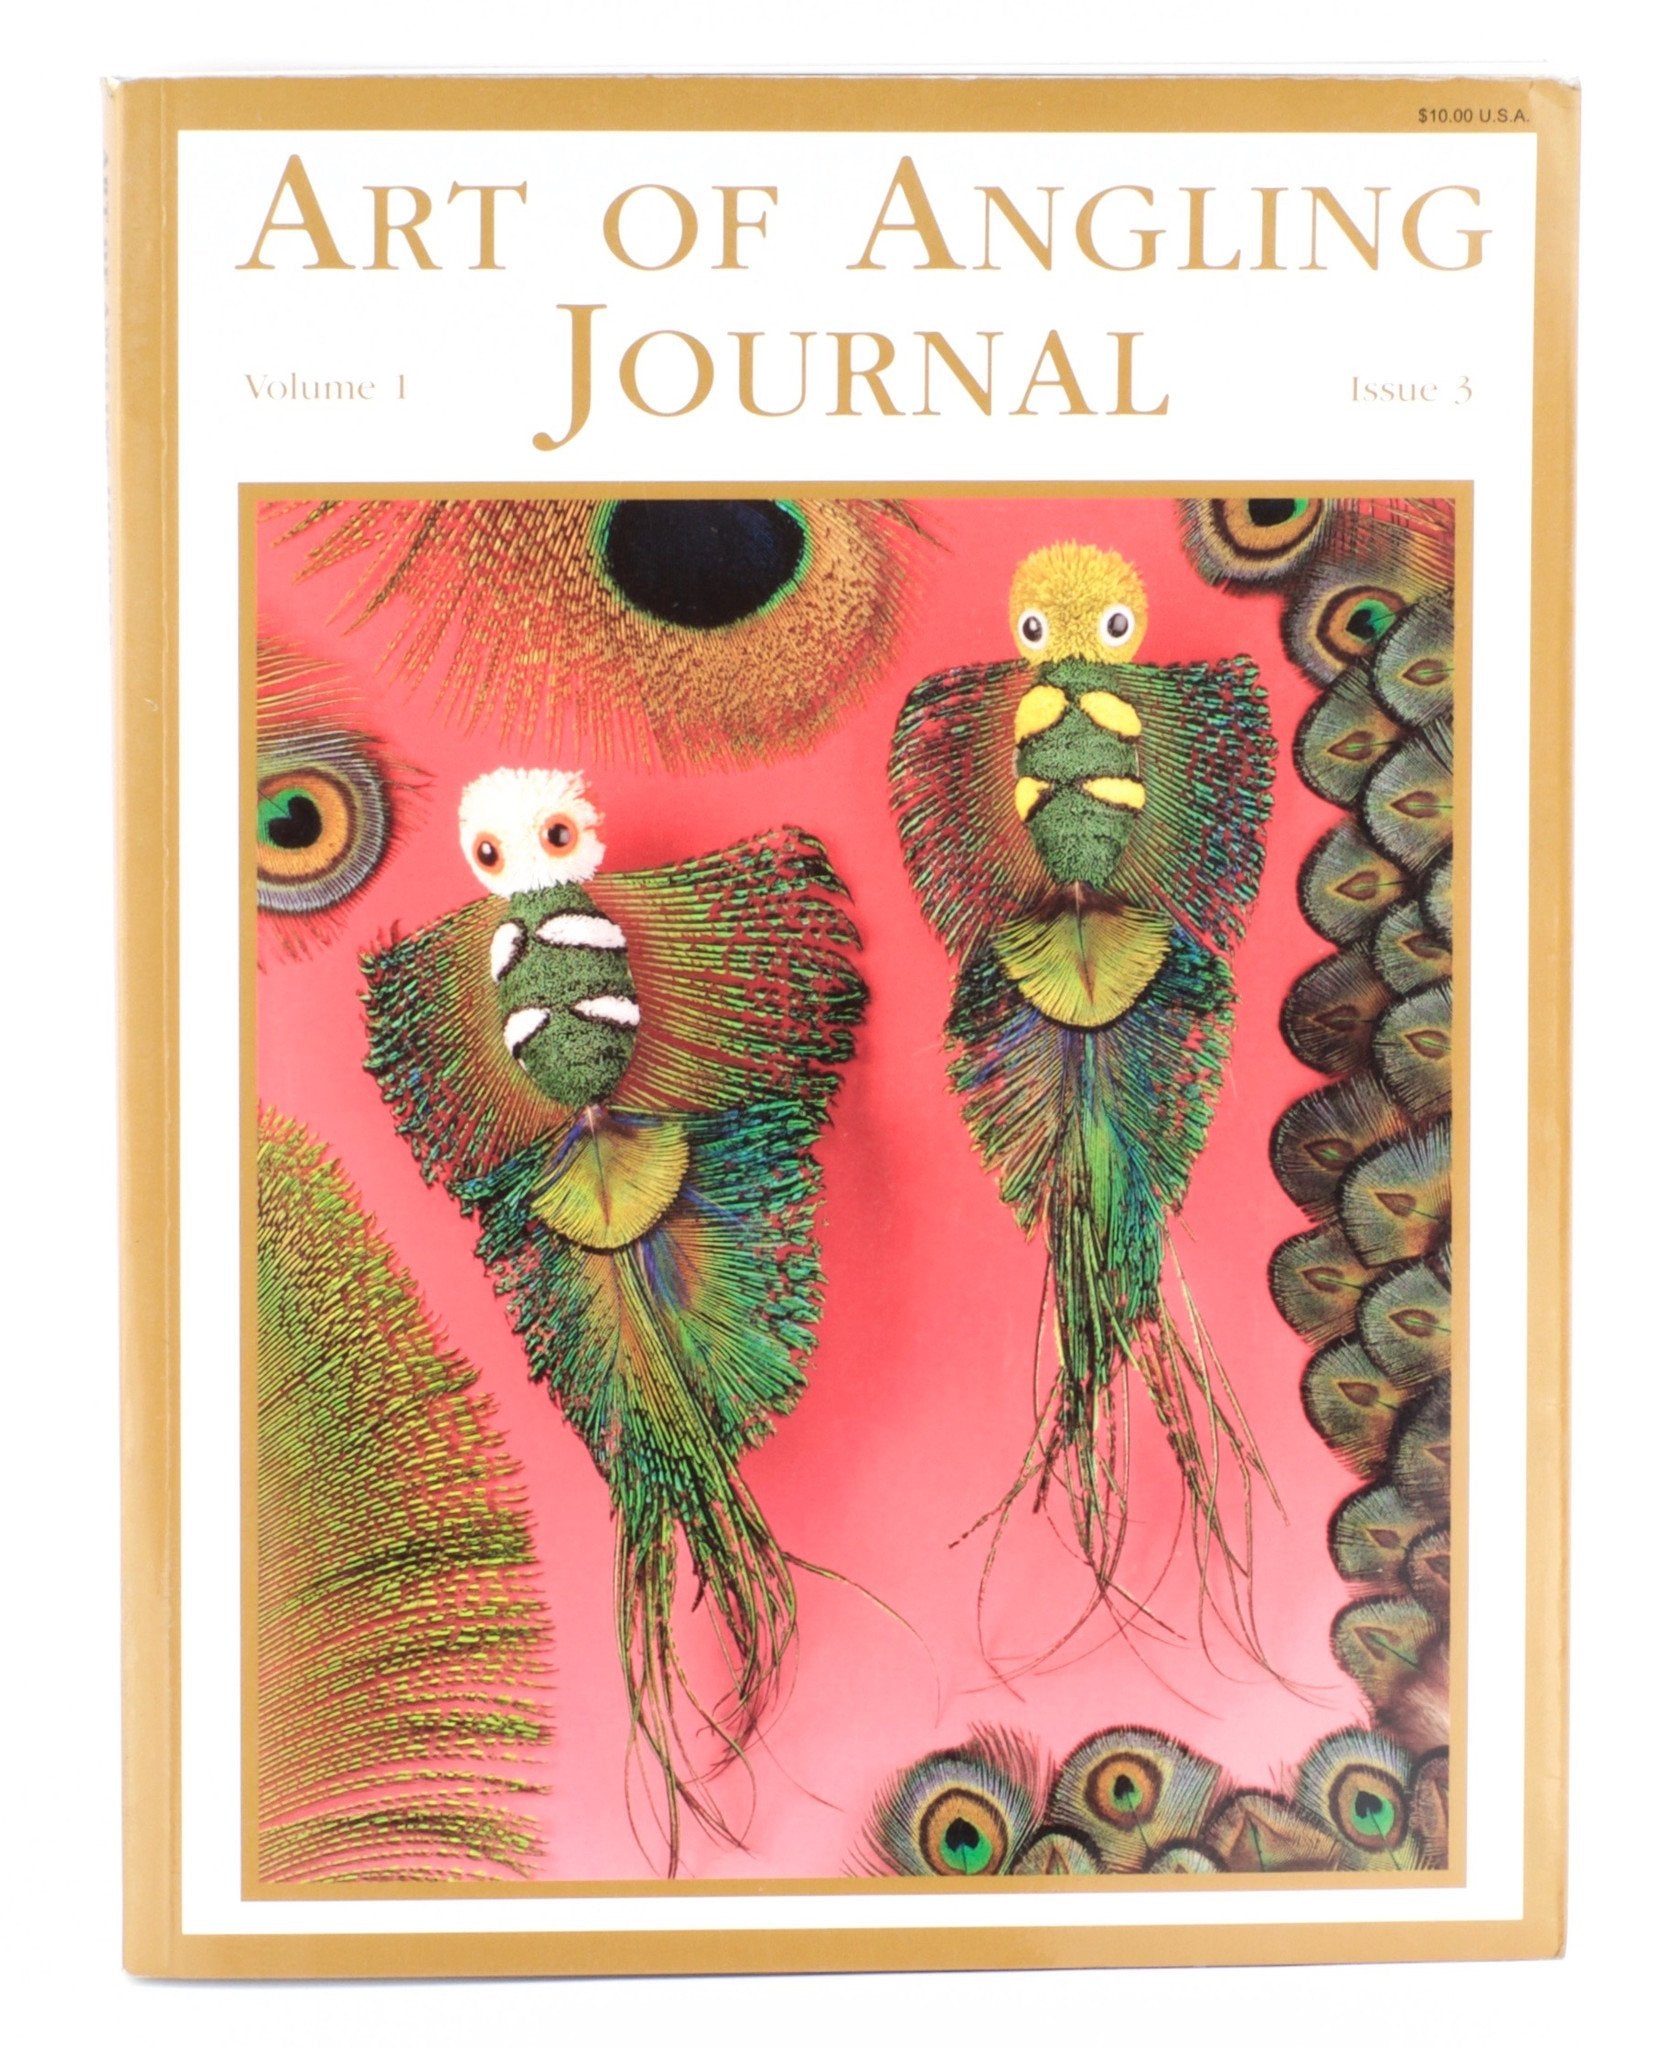 Art of Angling Journal - Volume 1 Issue 3 